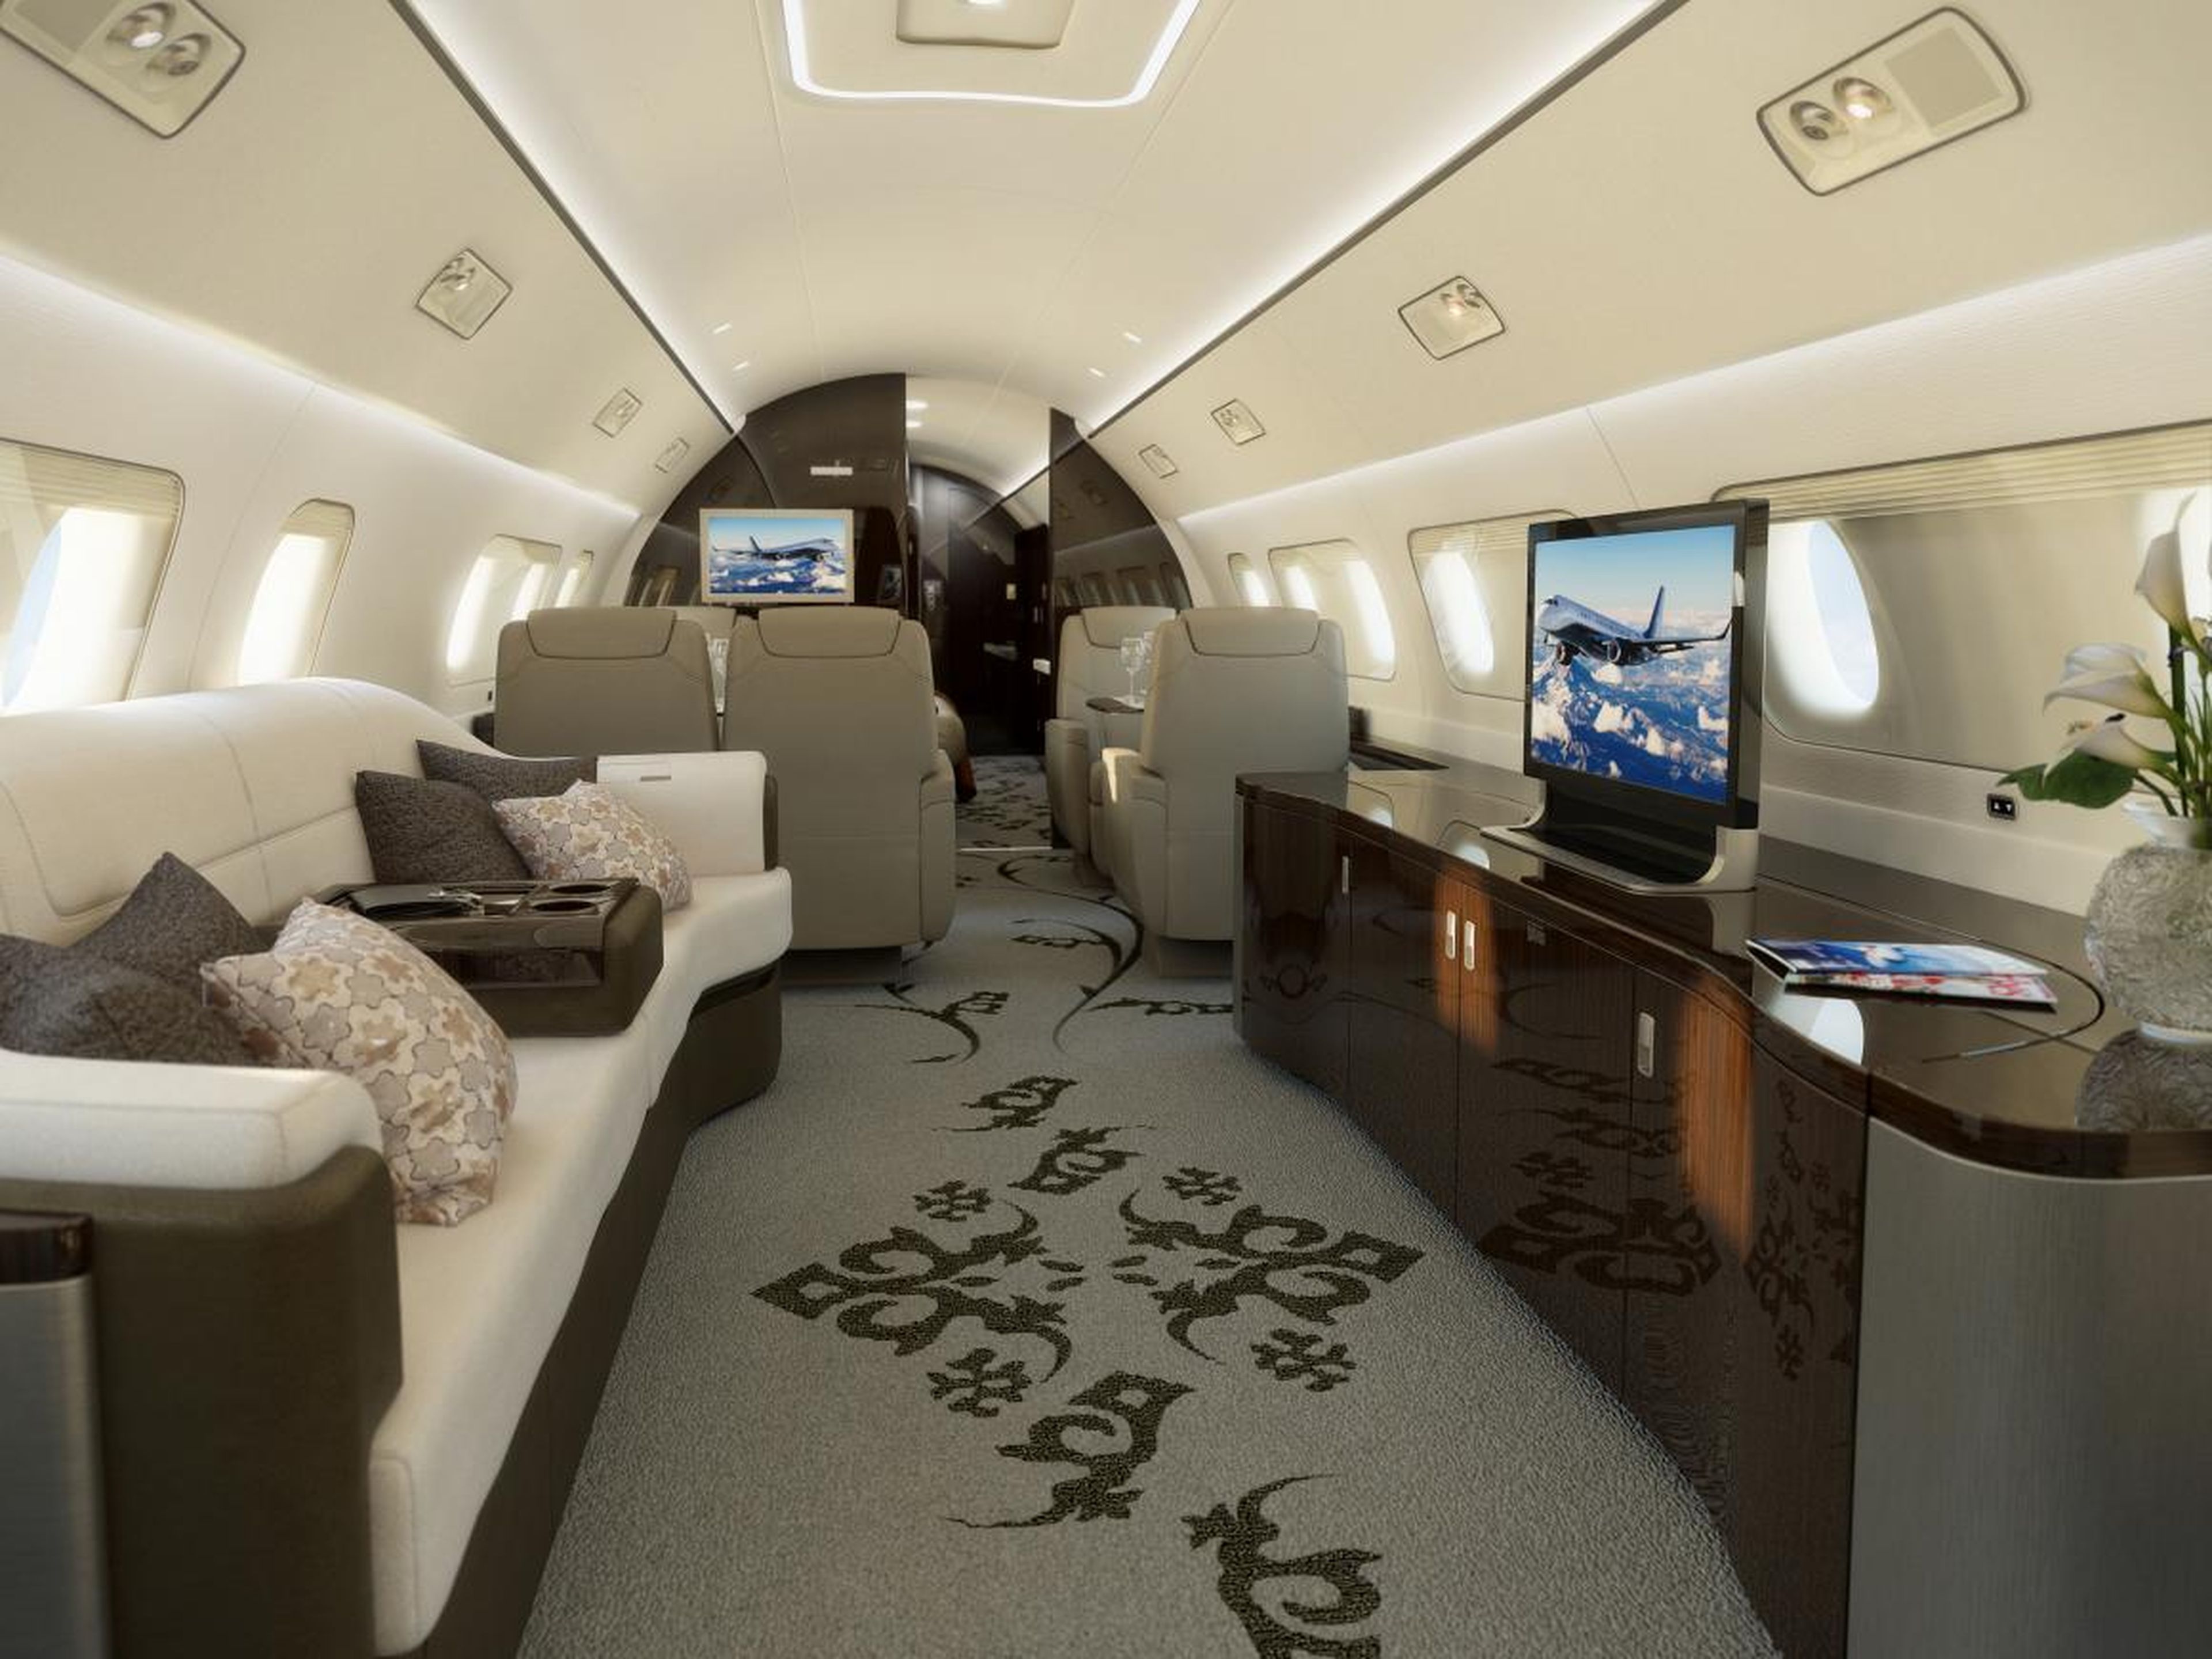 The spacious $53 million 1000E can be configured with a master bedroom and a walk-in shower.